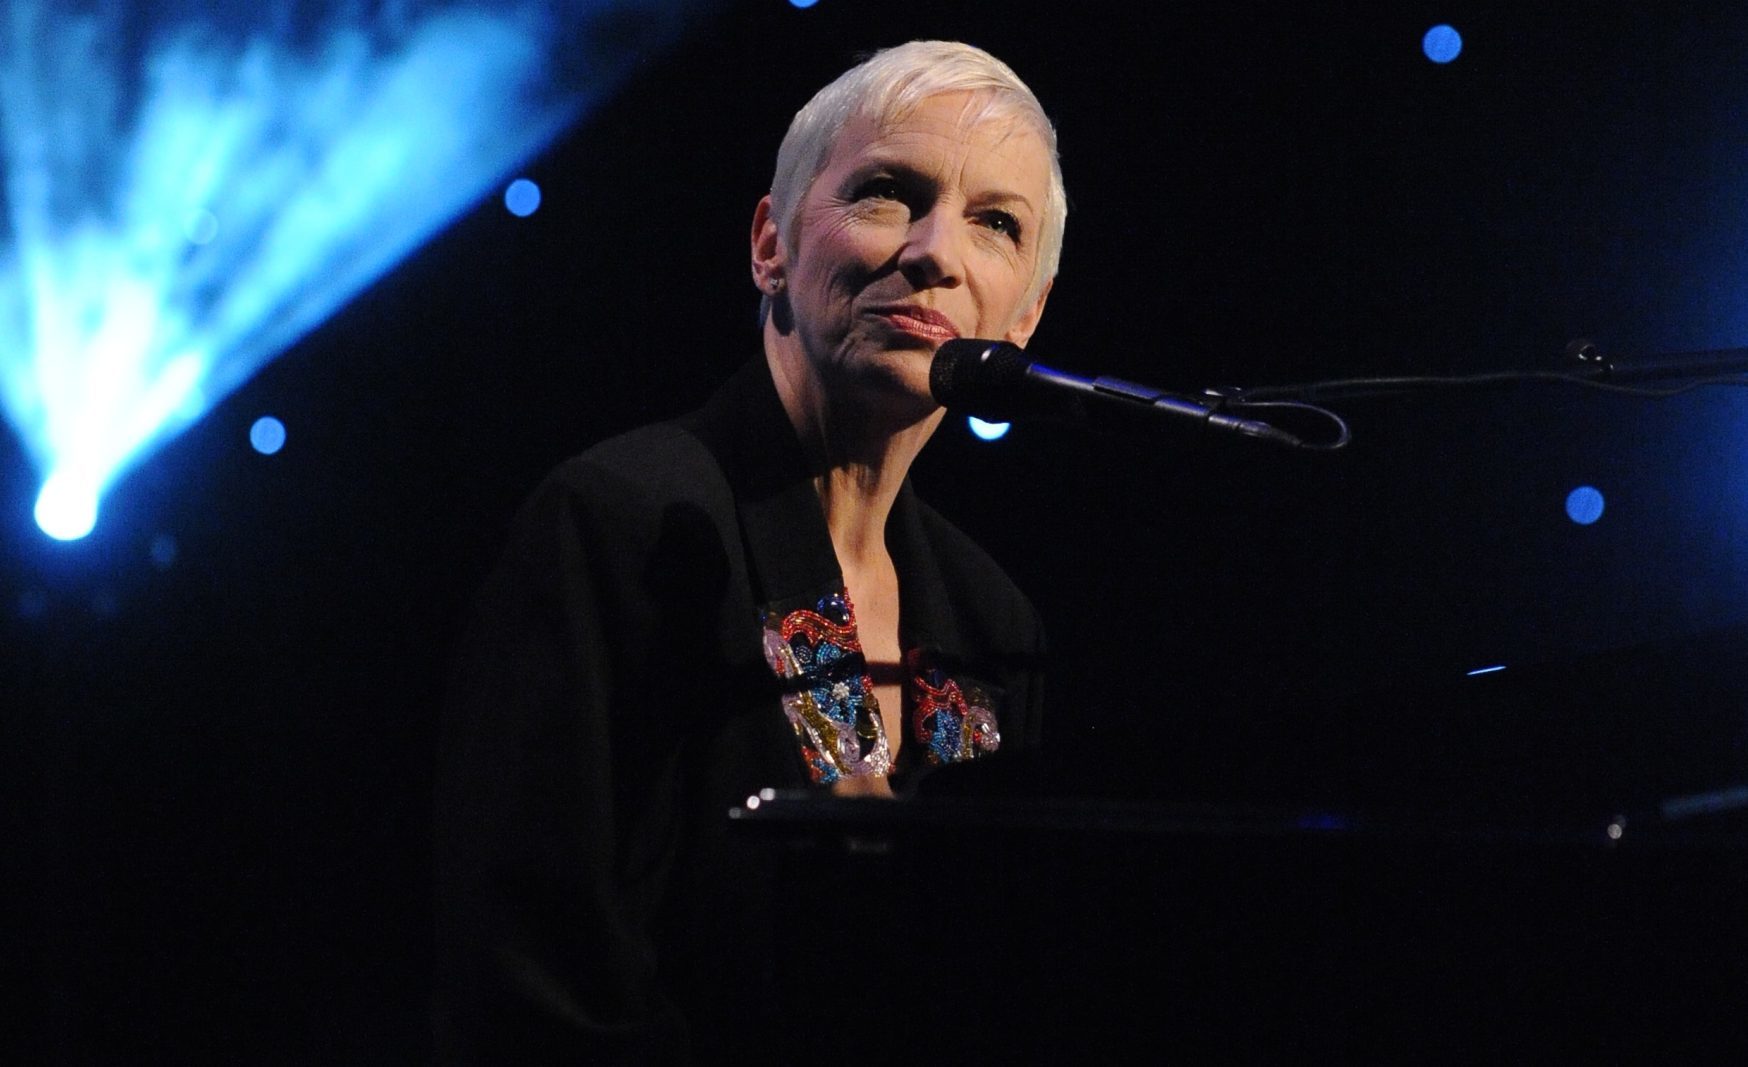 Annie Lennox is among the nominees at this year's awards (Johnny Vy/CBS via Getty Images)